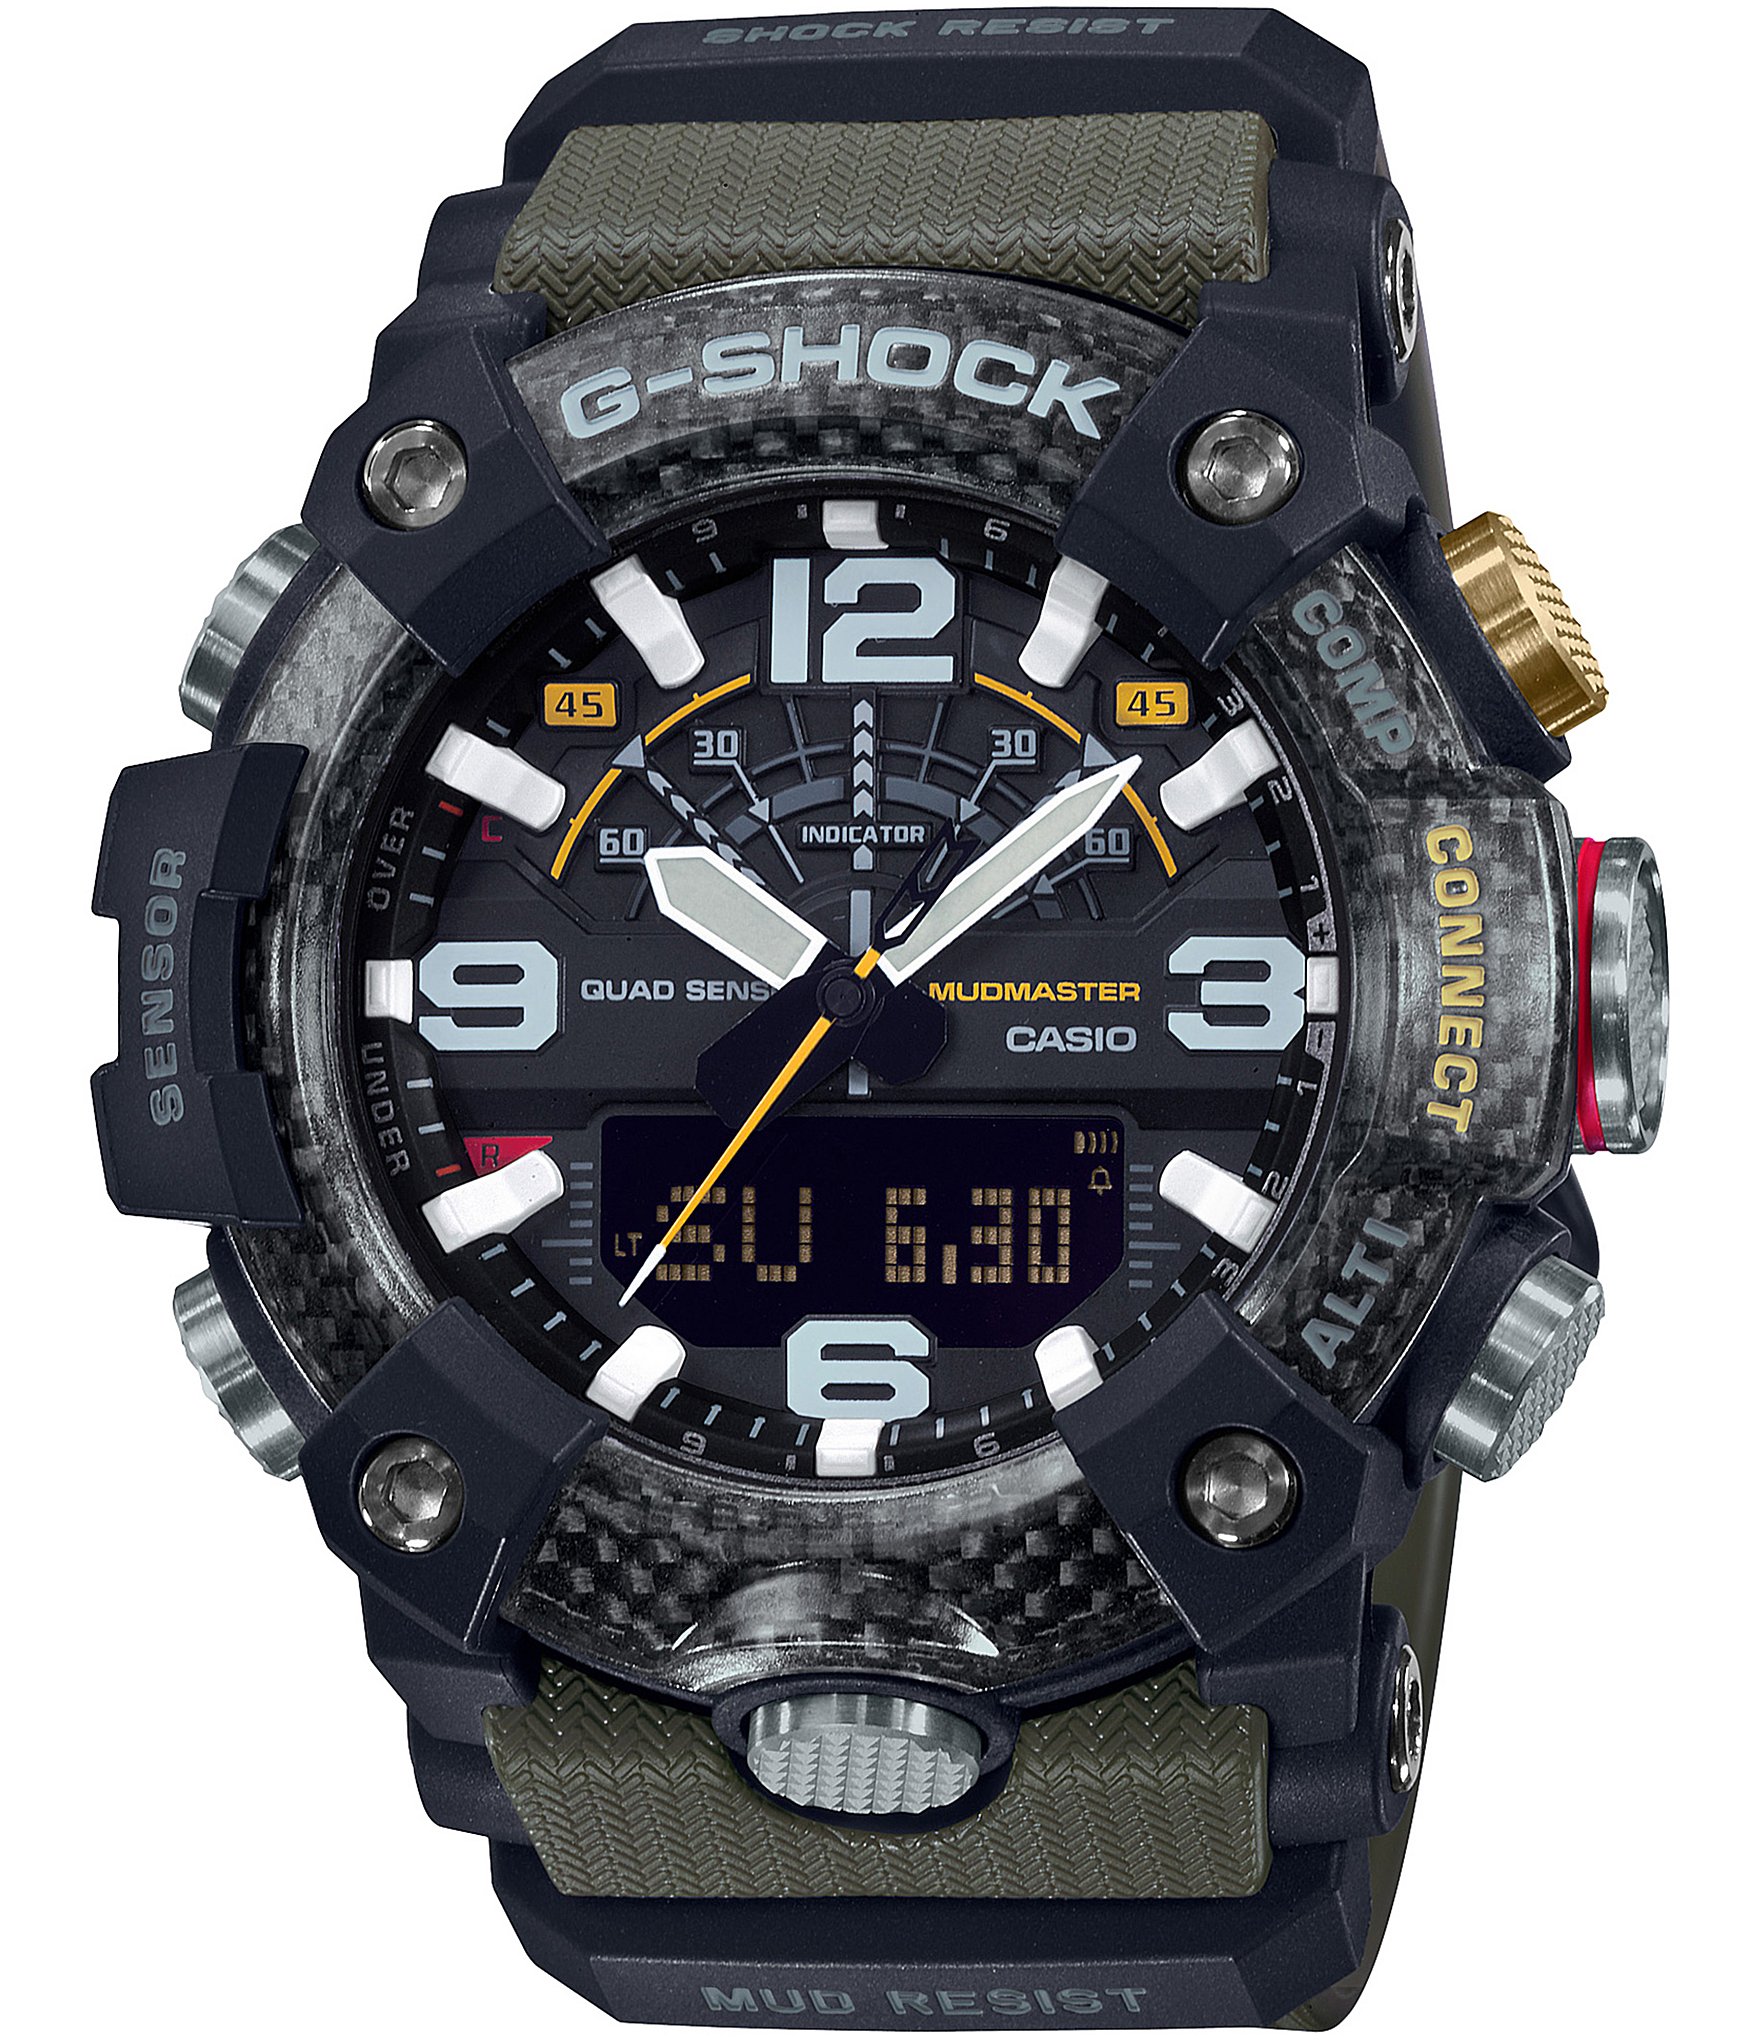 New Carbon G-Shock Mudmaster Gets Step Tracking and Bluetooth | Digital  Trends